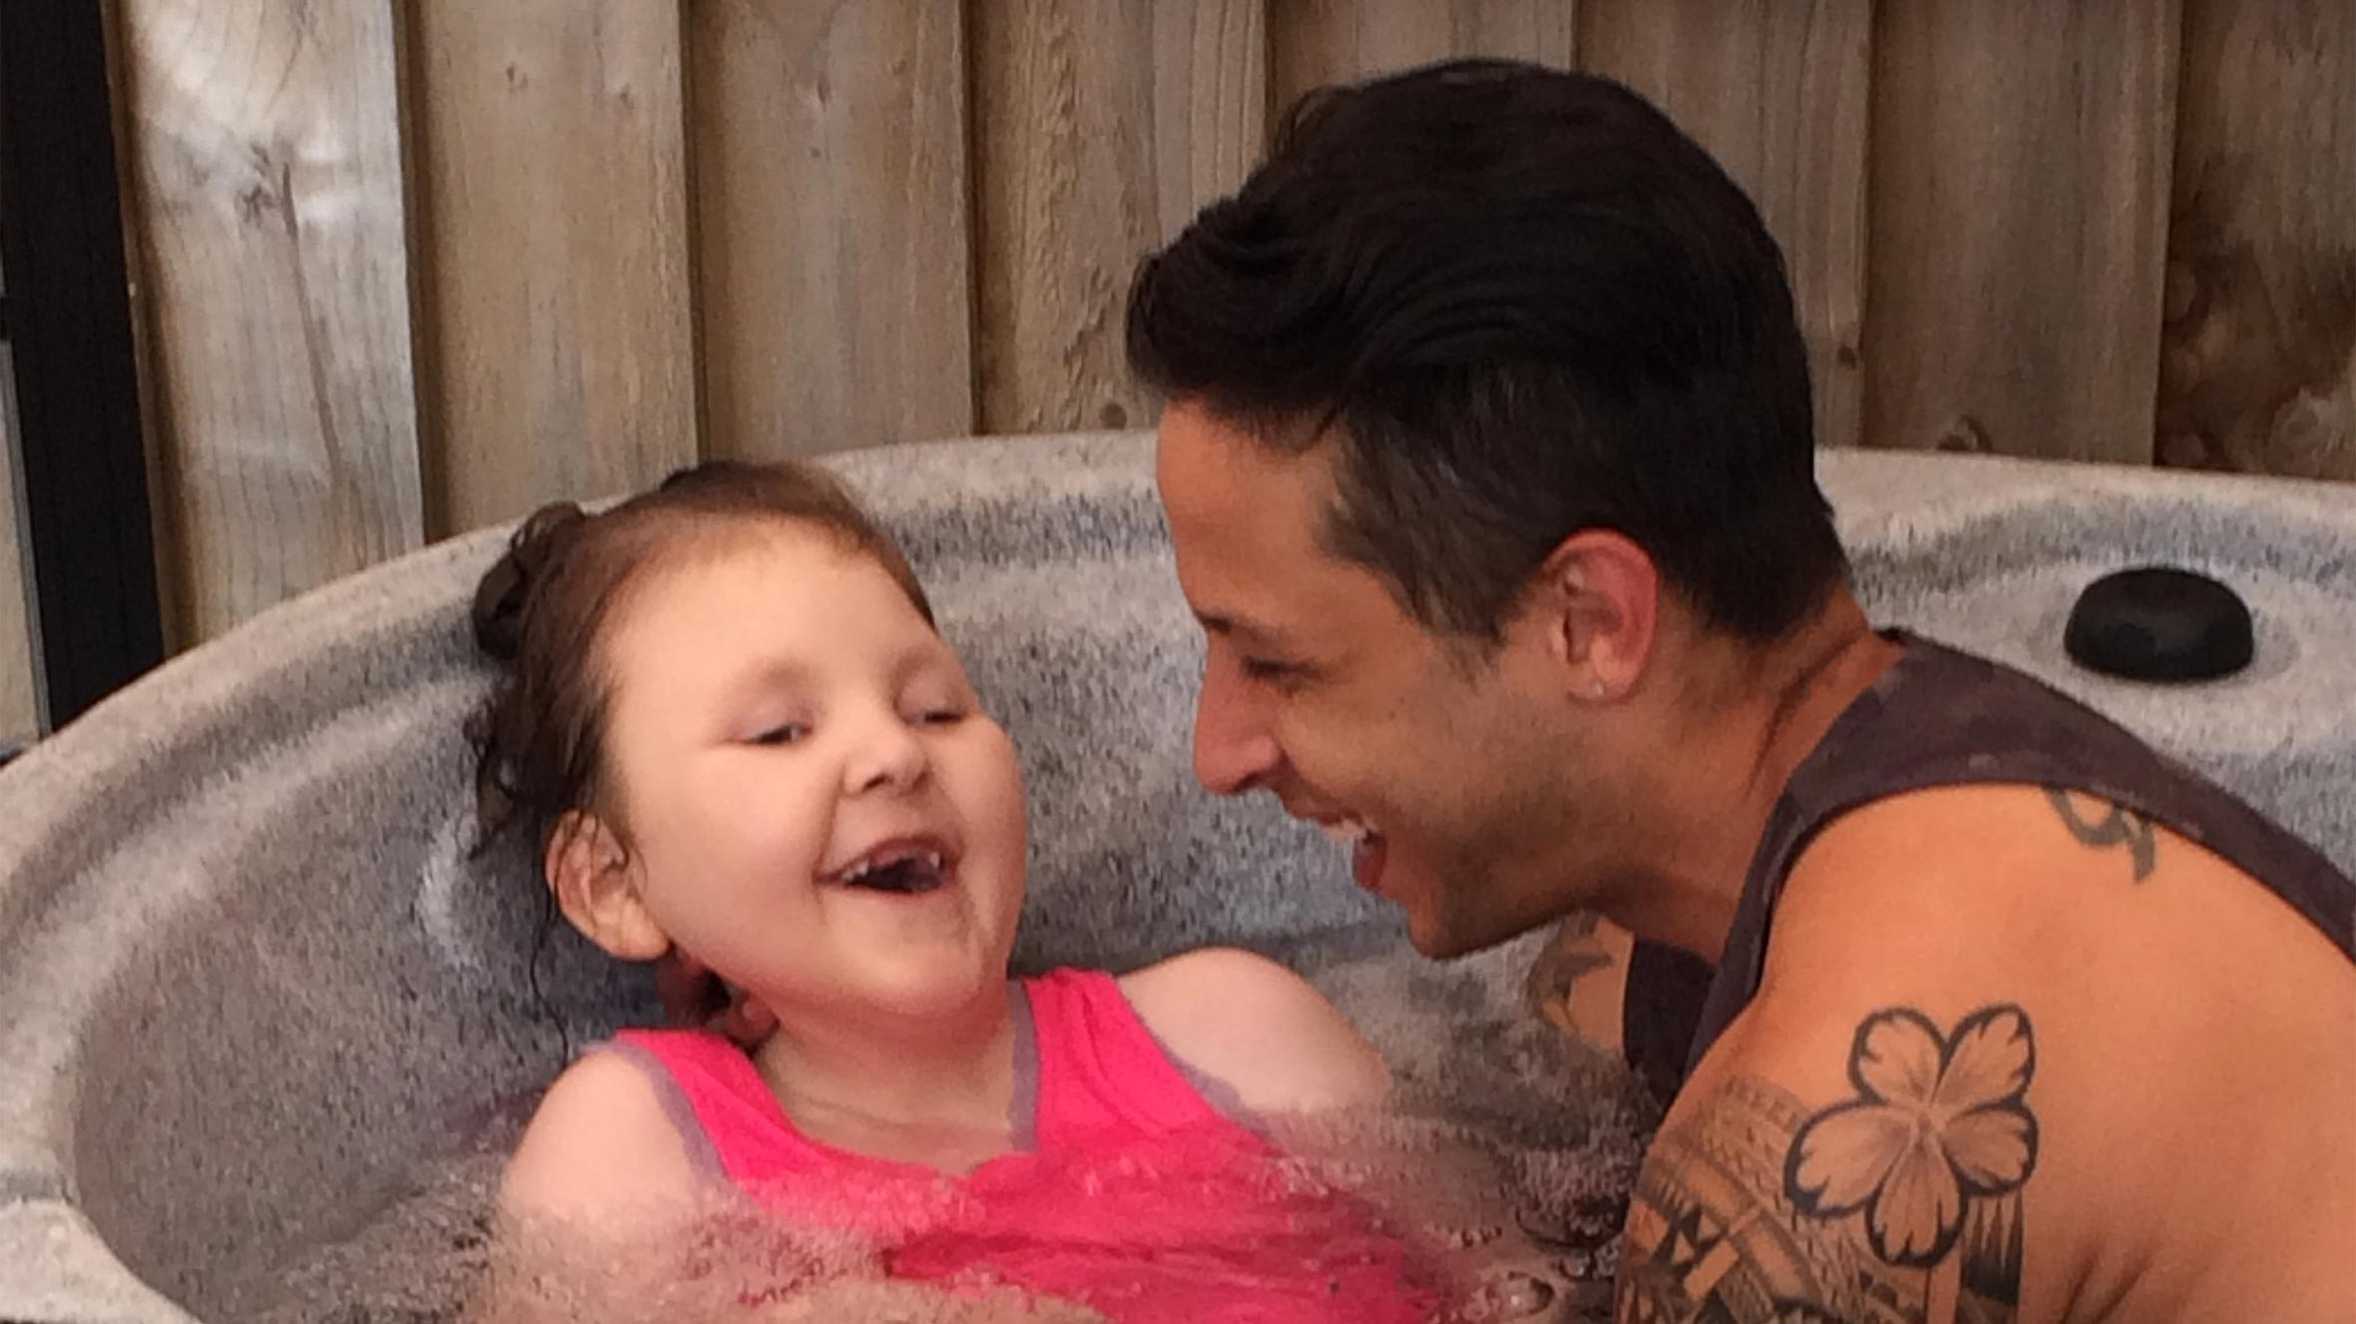 Casey smiling with her dad in the spa pool